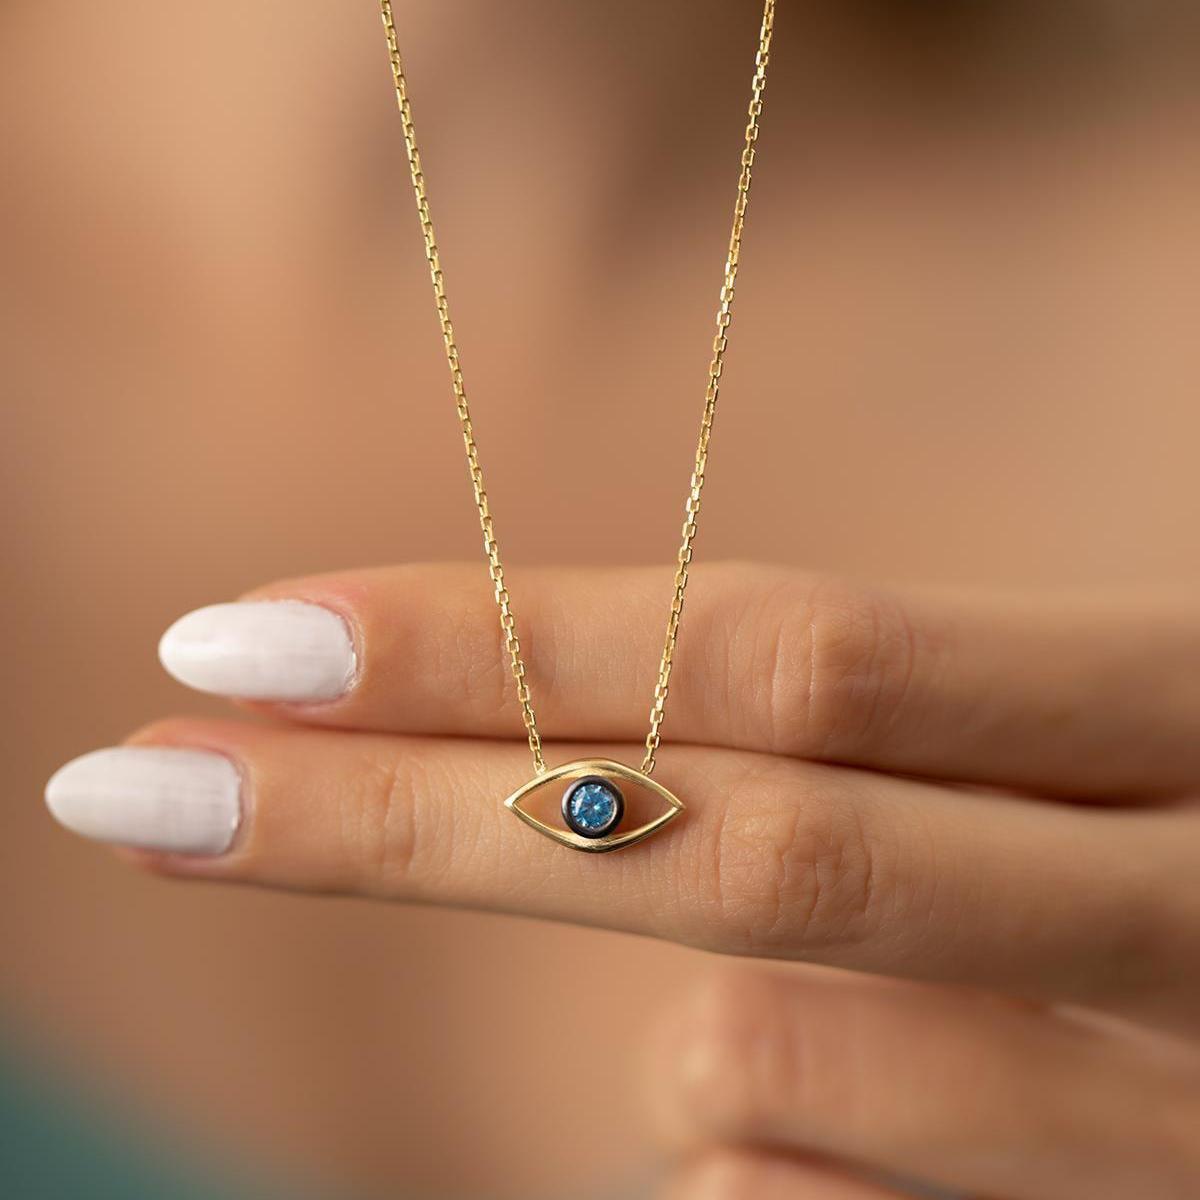 Eye Of Horus Necklace • Evil Eye Necklace Gold • Eye Necklace Silver - Trending Silver Gifts